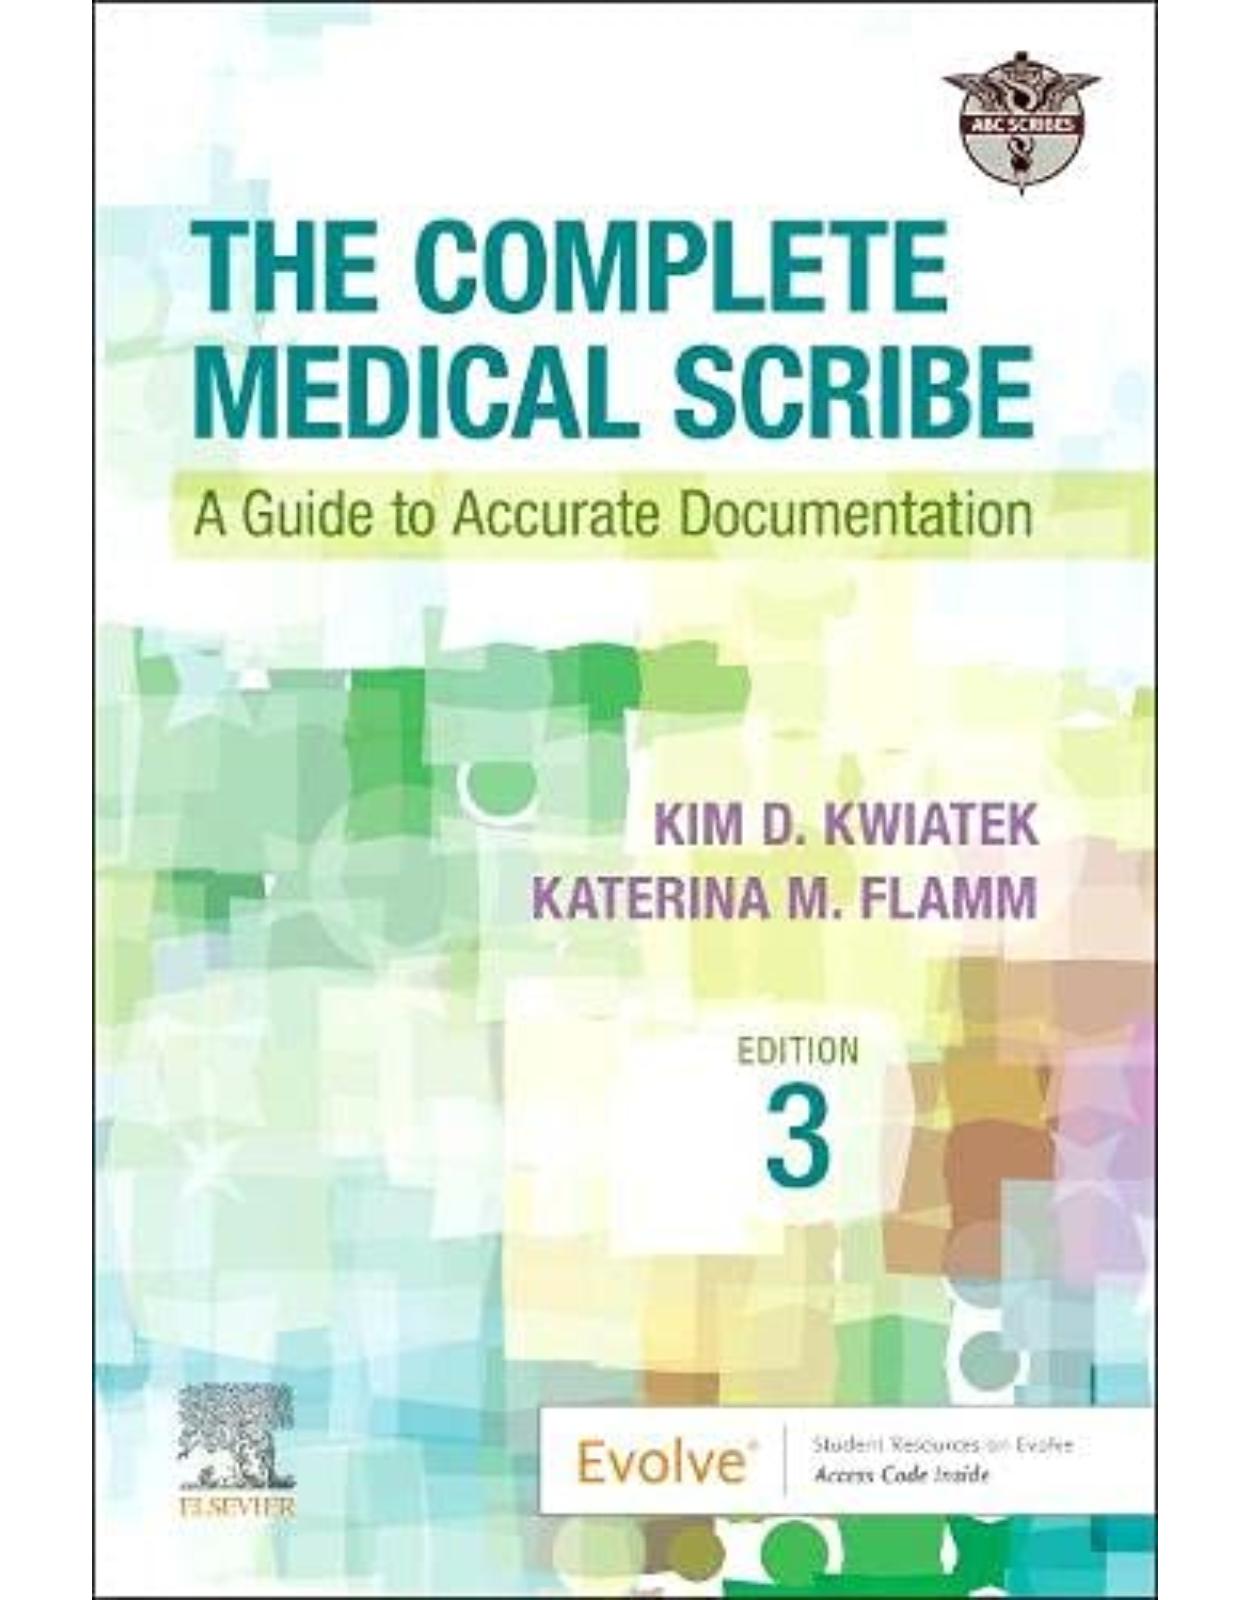 The Complete Medical Scribe: A Guide to Accurate Documentation 